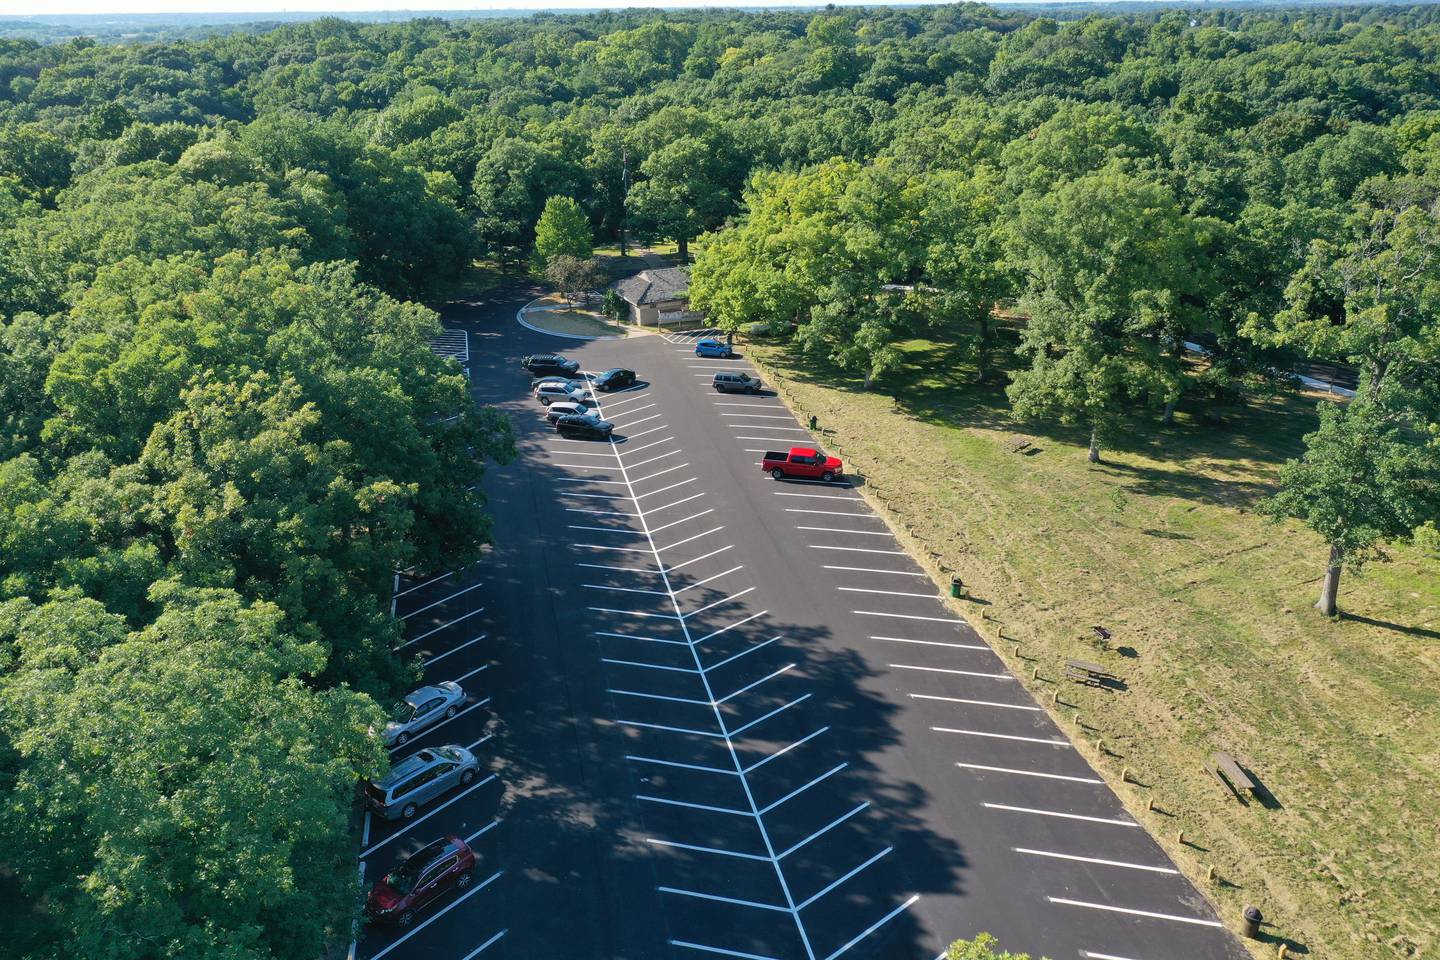 Vehicles park in a newly paved parking lot at Matthiessen State Park on Tuesday, Aug. 16, 2022 in Oglesby. Crews paved the parking lot and entrance road to Illinois Route 178. A sidewalk was also added along the entrance road.